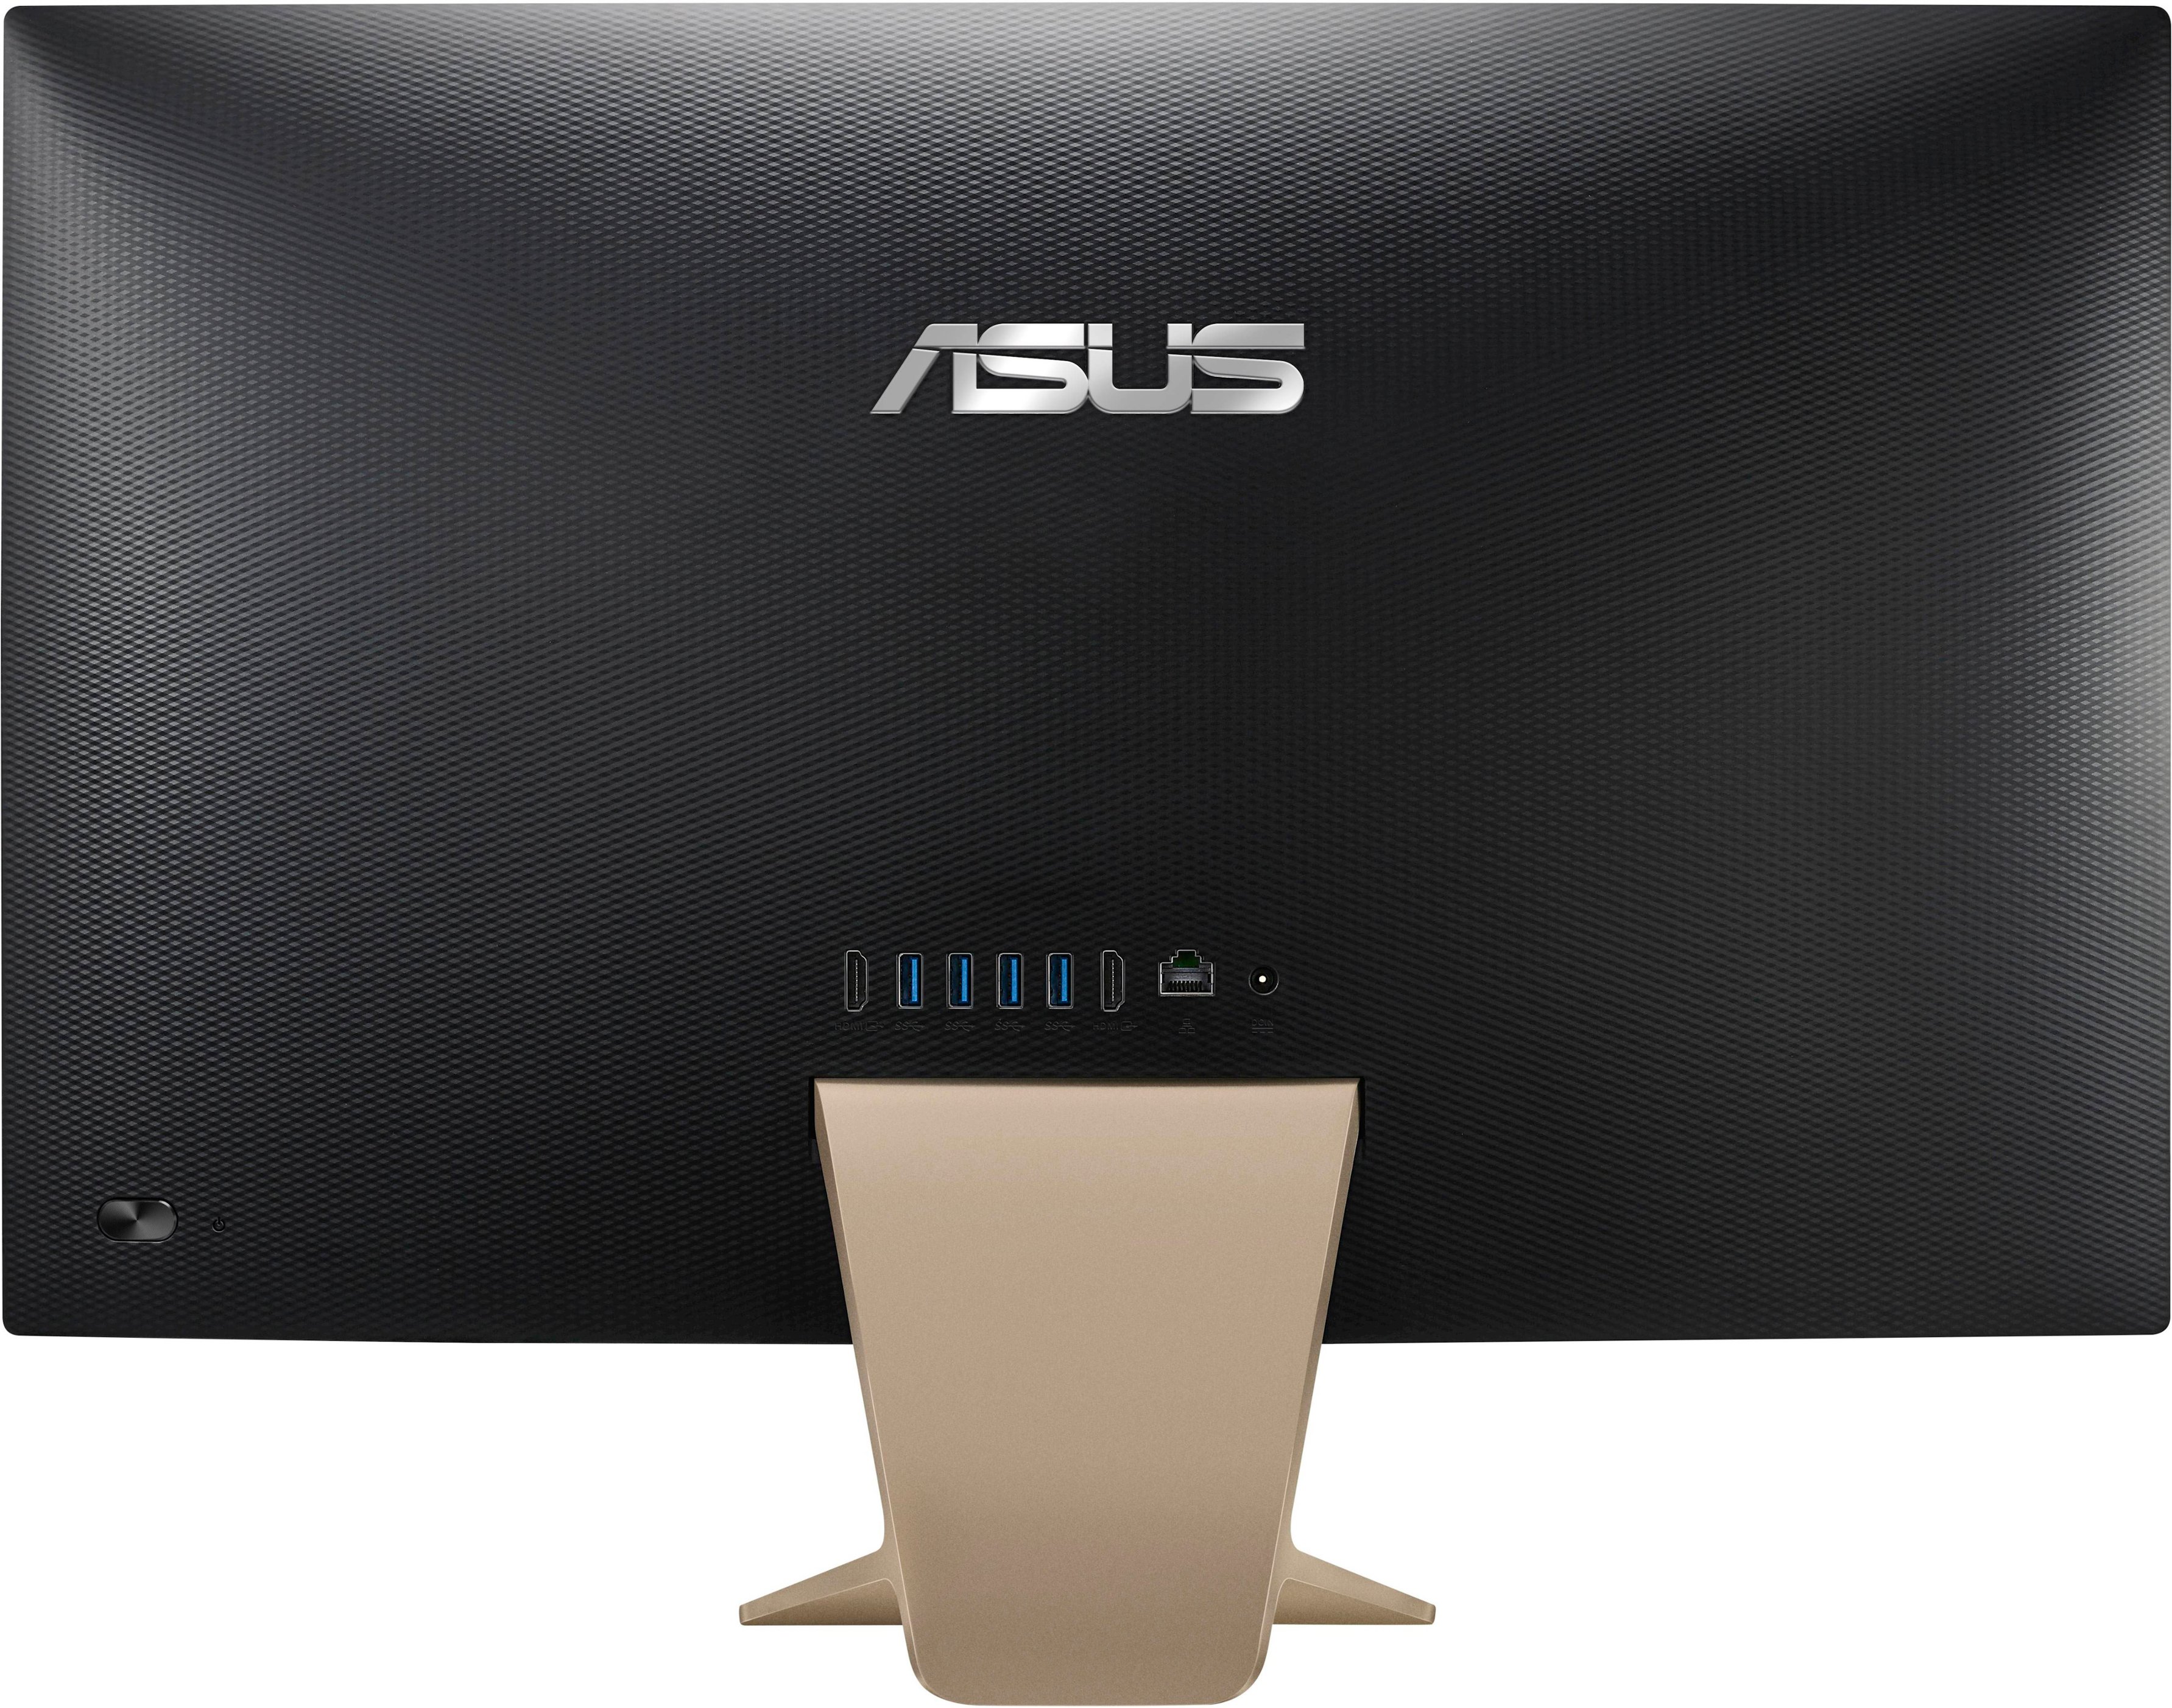 Back View: ASUS - 23.8" All-In-One - Pentium Gold - 8GB Memory - 256GB SSD - Black